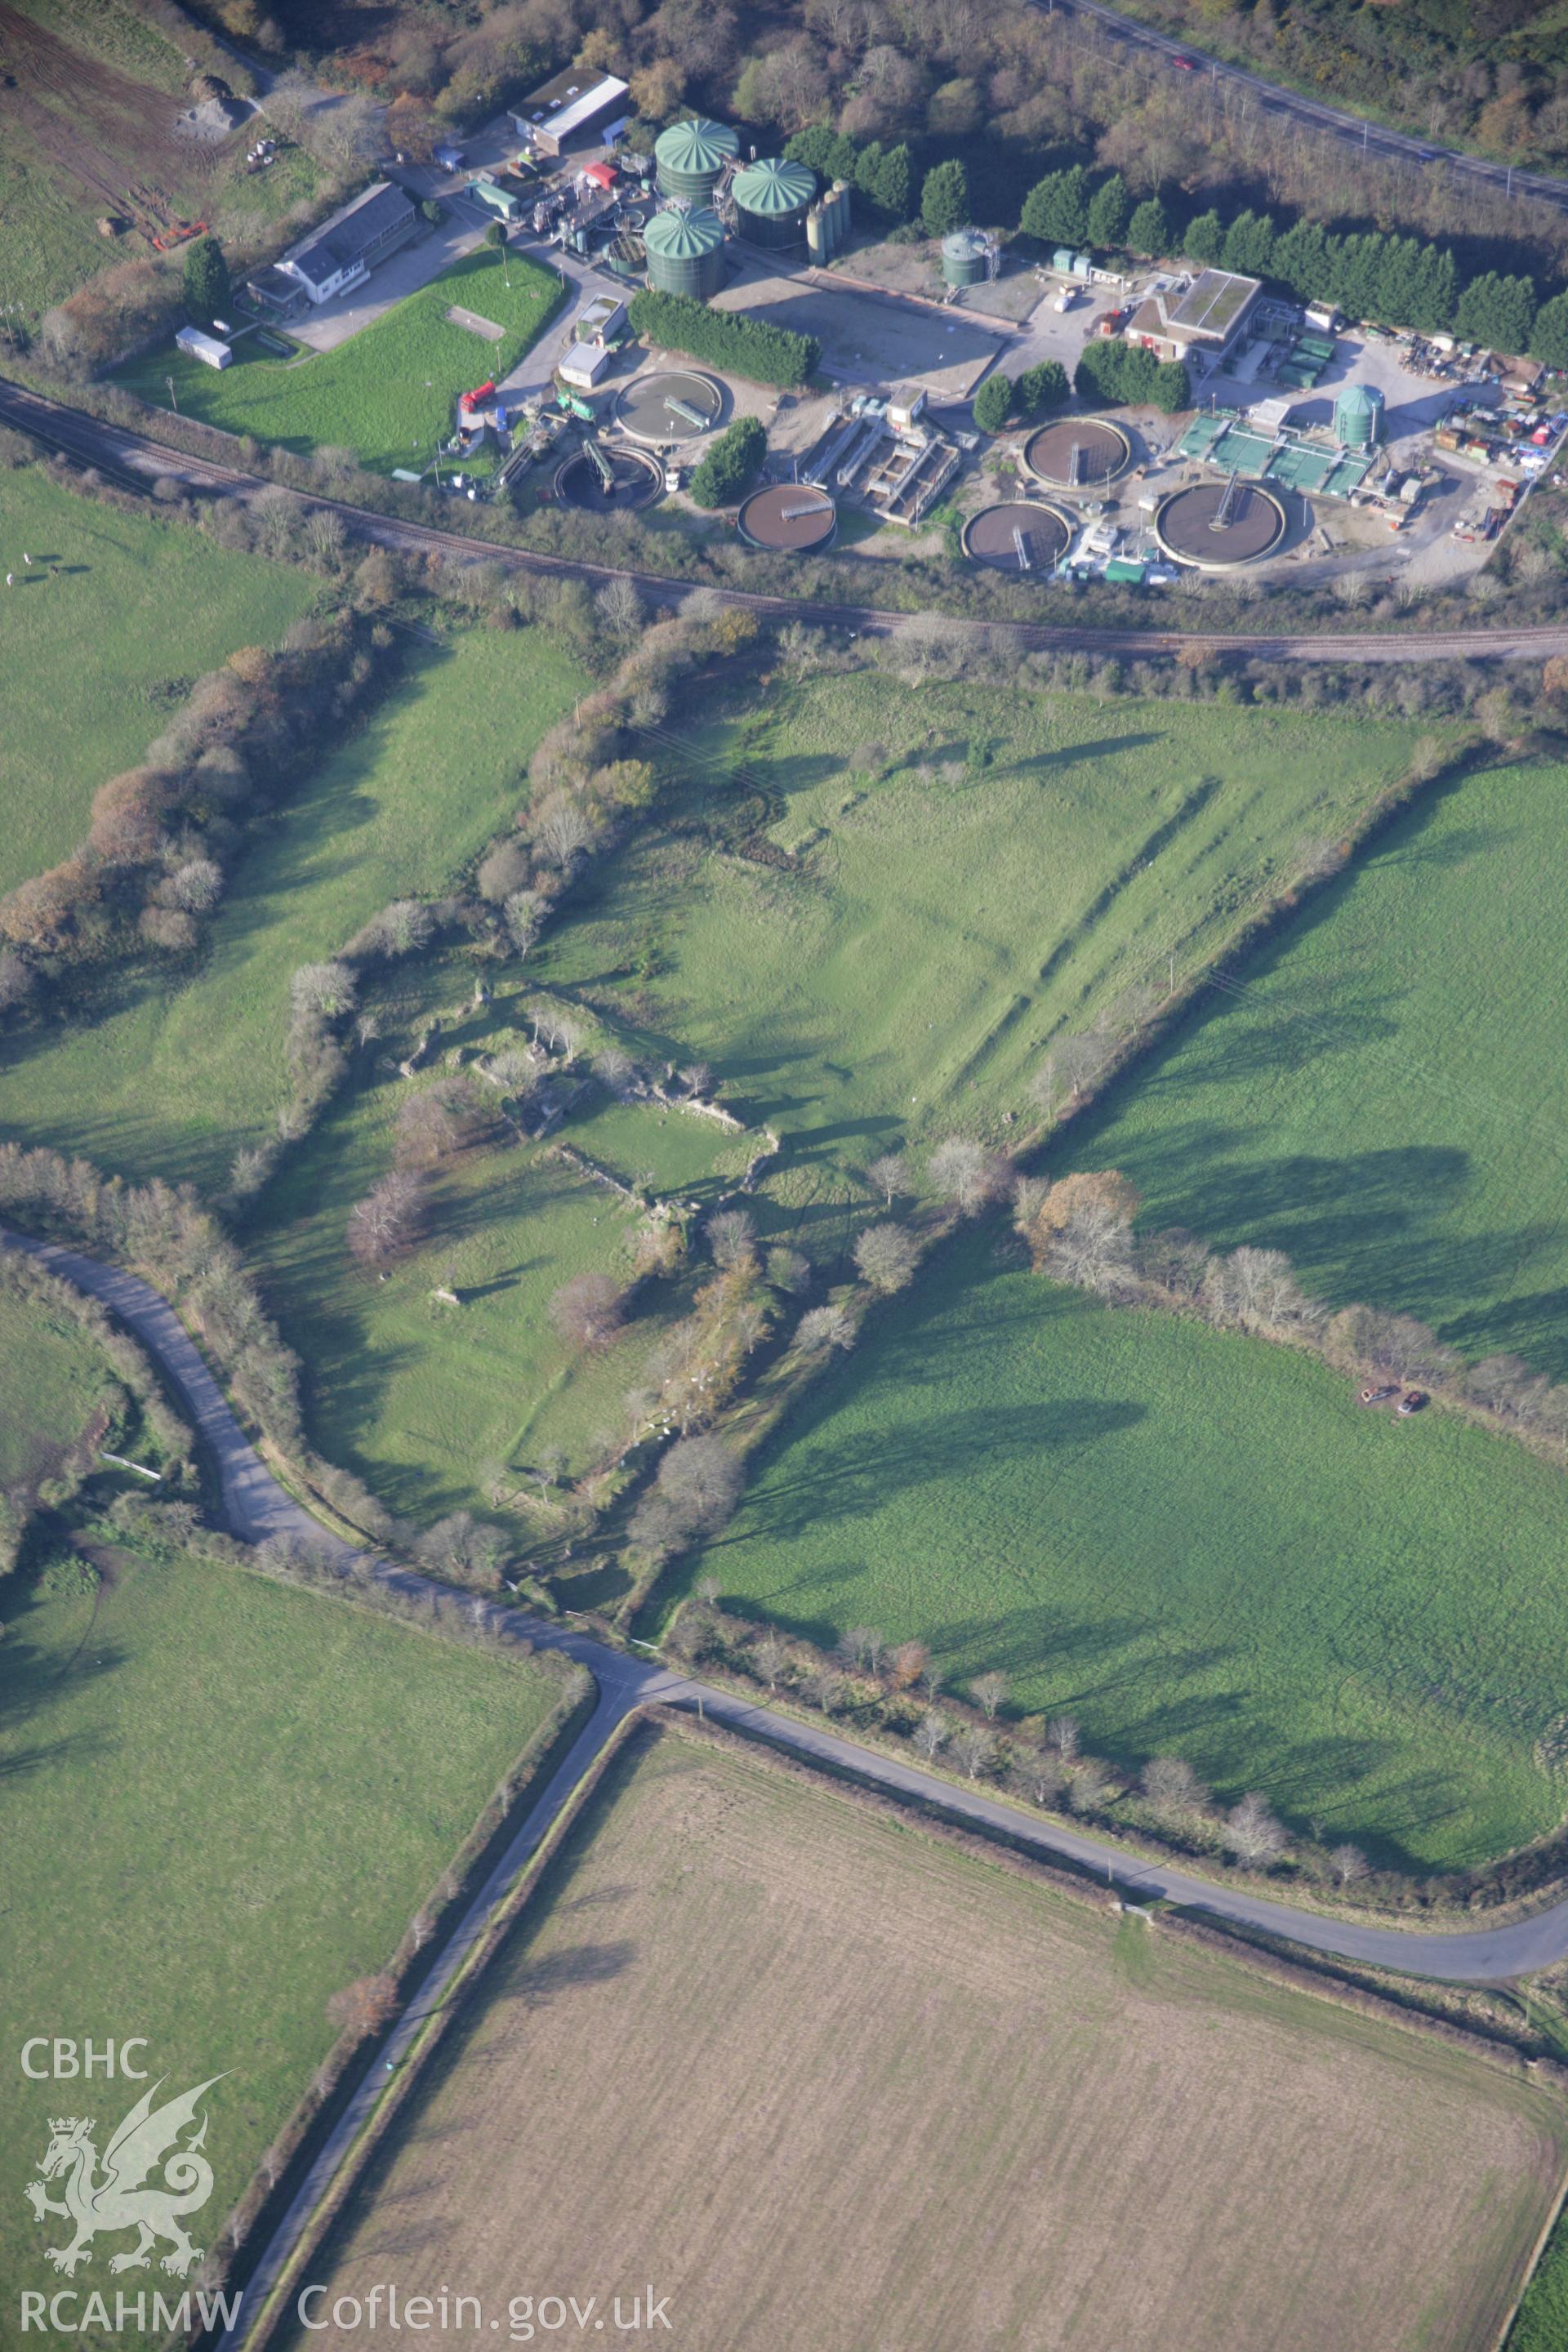 RCAHMW colour oblique aerial photograph of Haroldston House Garden Earthworks, Haverfordwest, in winter with low light looking north-west. Taken on 19 November 2005 by Toby Driver